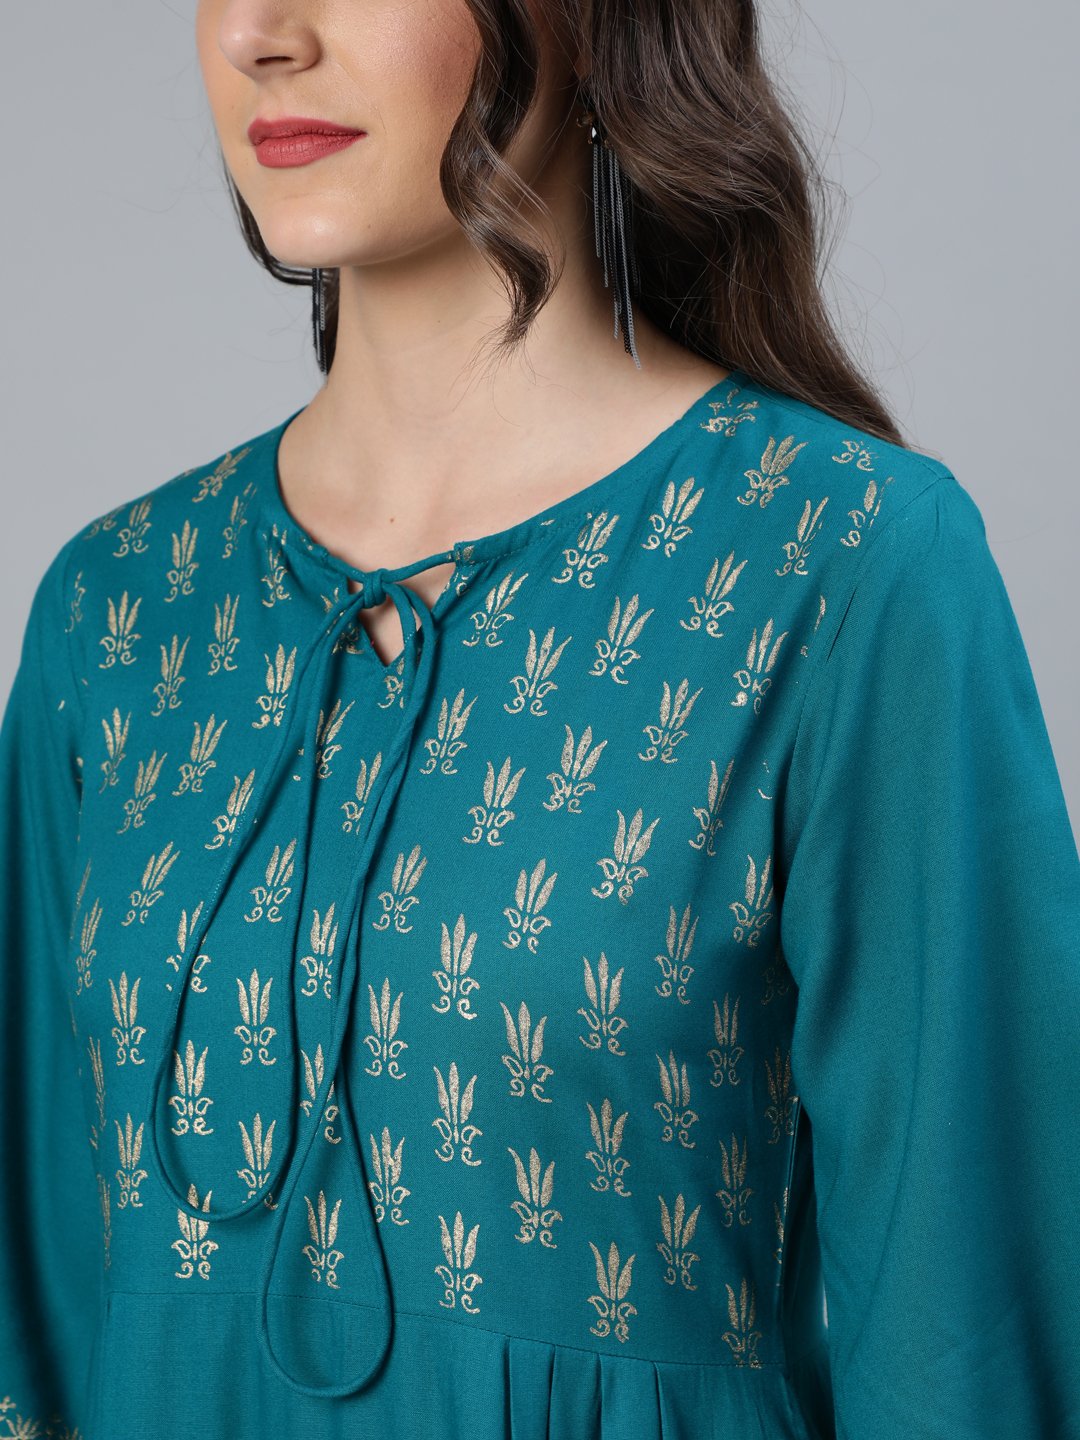 Women's Green & Gold Block Printed Dress With Three Quarter Sleeves - Nayo Clothing